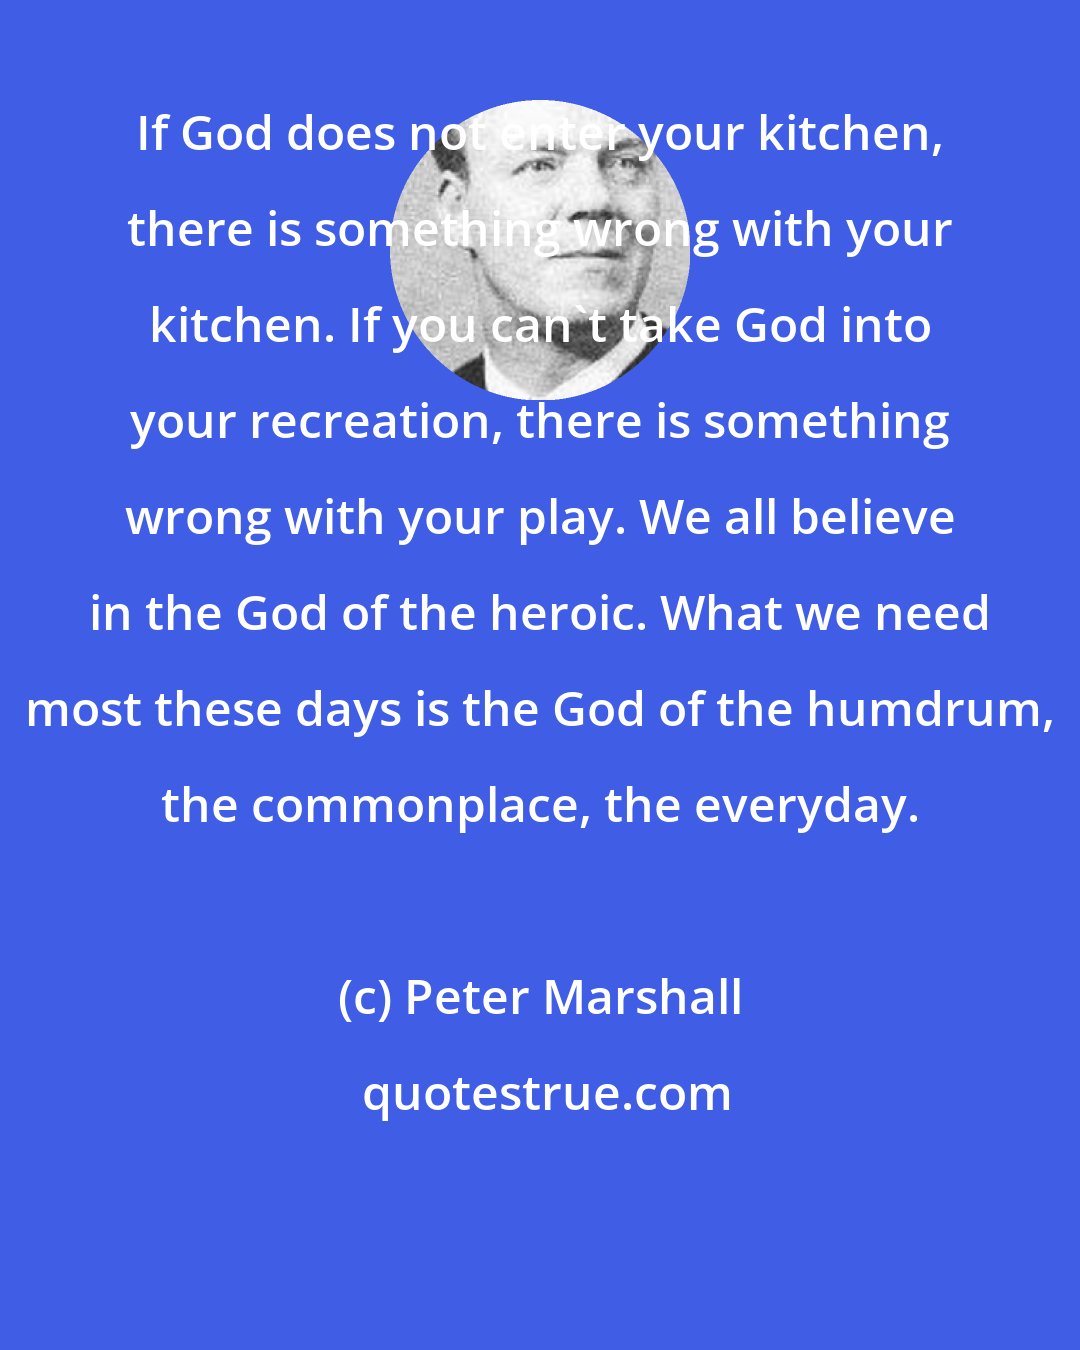 Peter Marshall: If God does not enter your kitchen, there is something wrong with your kitchen. If you can't take God into your recreation, there is something wrong with your play. We all believe in the God of the heroic. What we need most these days is the God of the humdrum, the commonplace, the everyday.